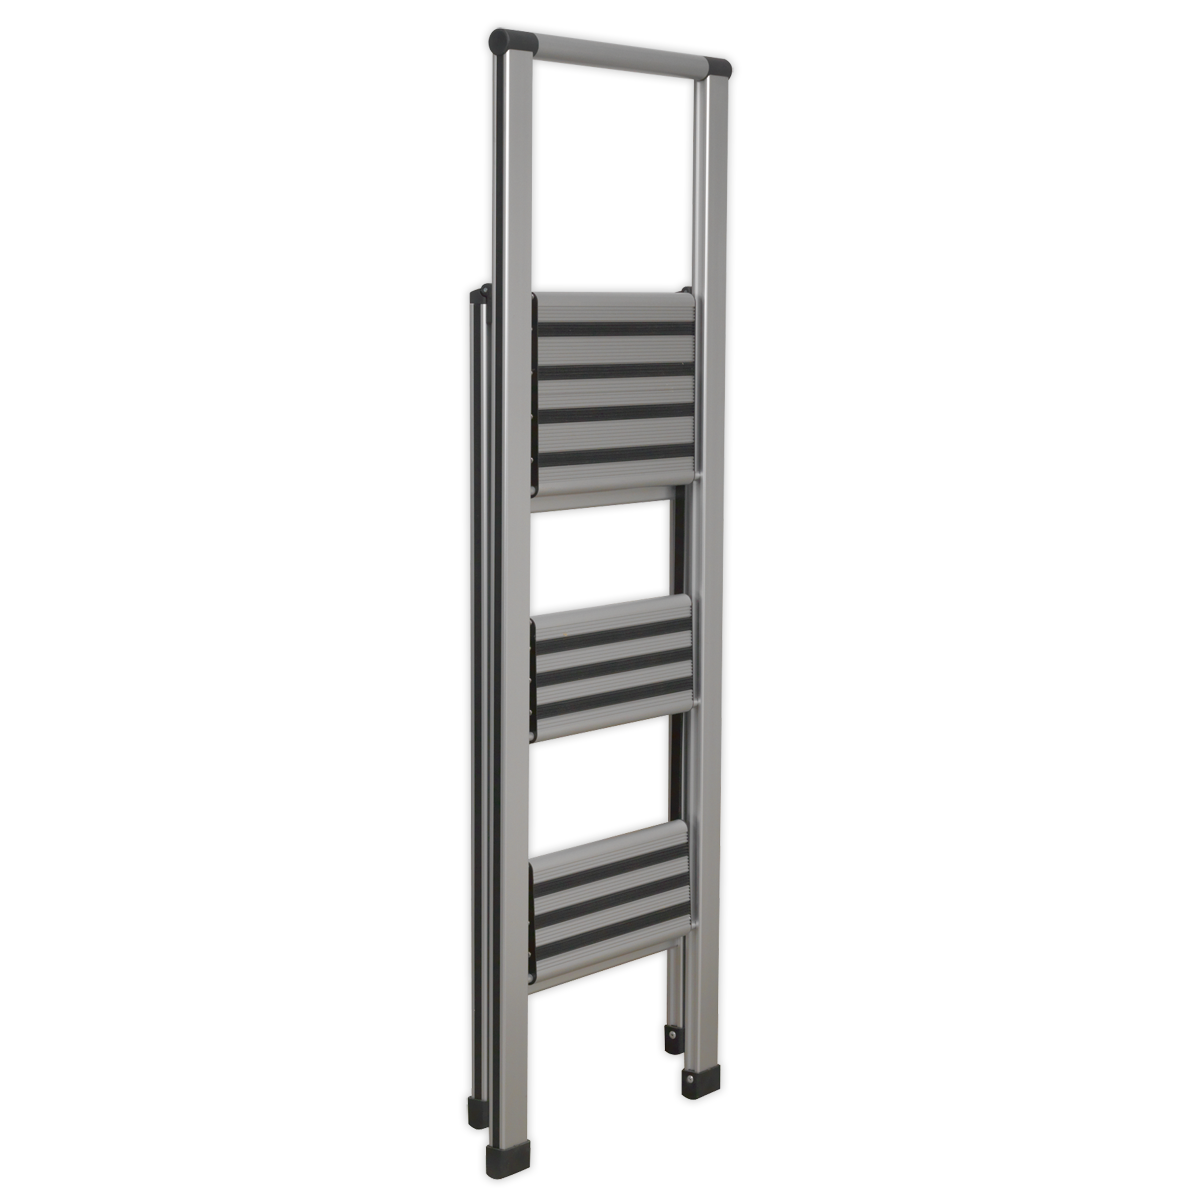 Sealey Aluminium Professional collapsible Step Ladder 3-Step 150kg Capacity APSL3